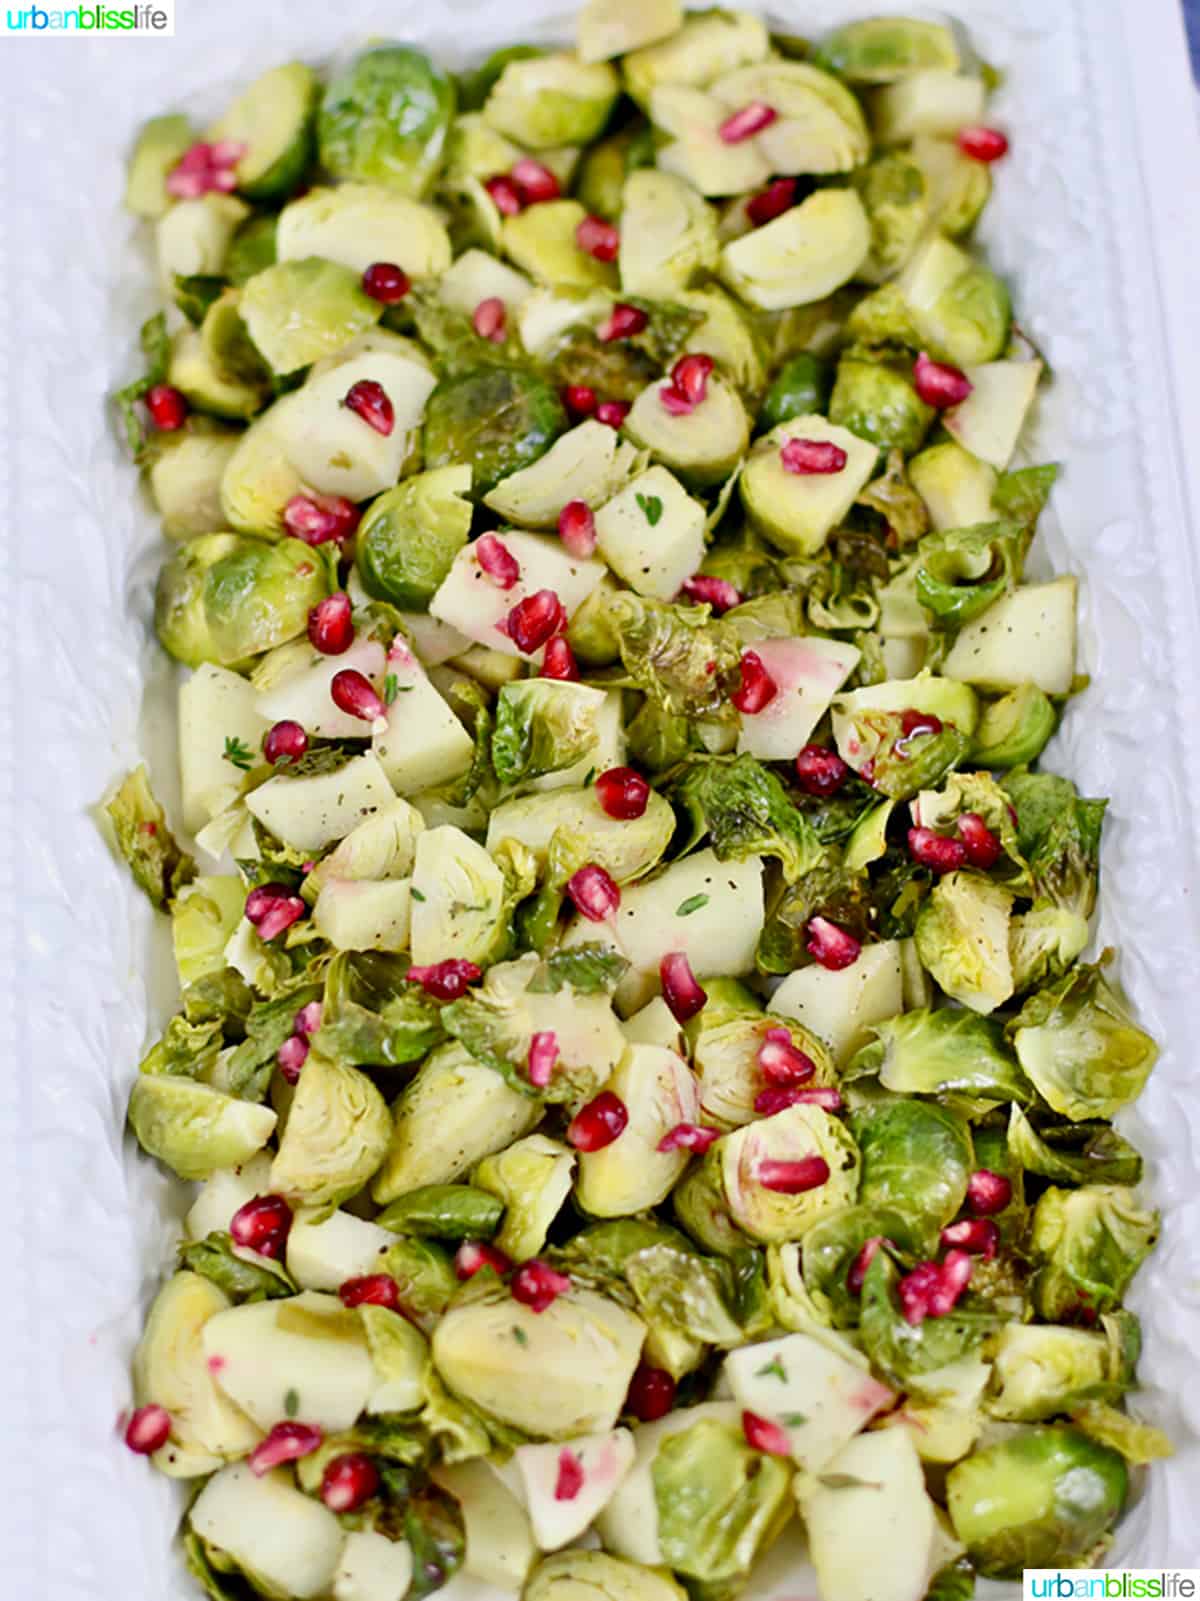 serving platter with roasted brussels sprouts, apples, pomegranate